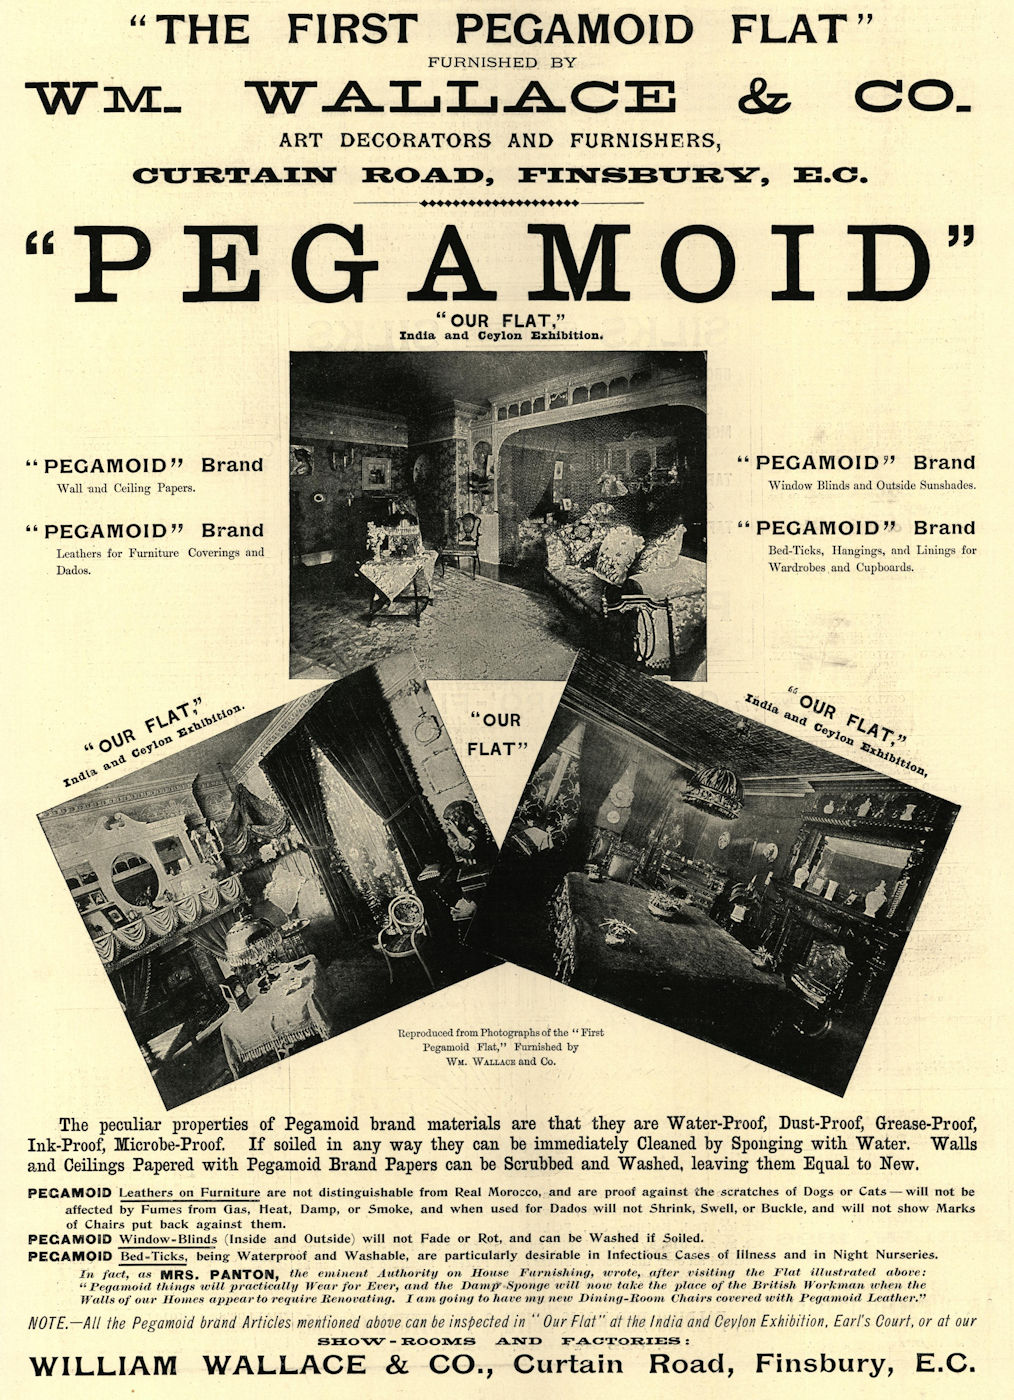 The 1st Pegamoid flat furnished by Wm Wallace Curtain Road Finsbury. Advert 1896